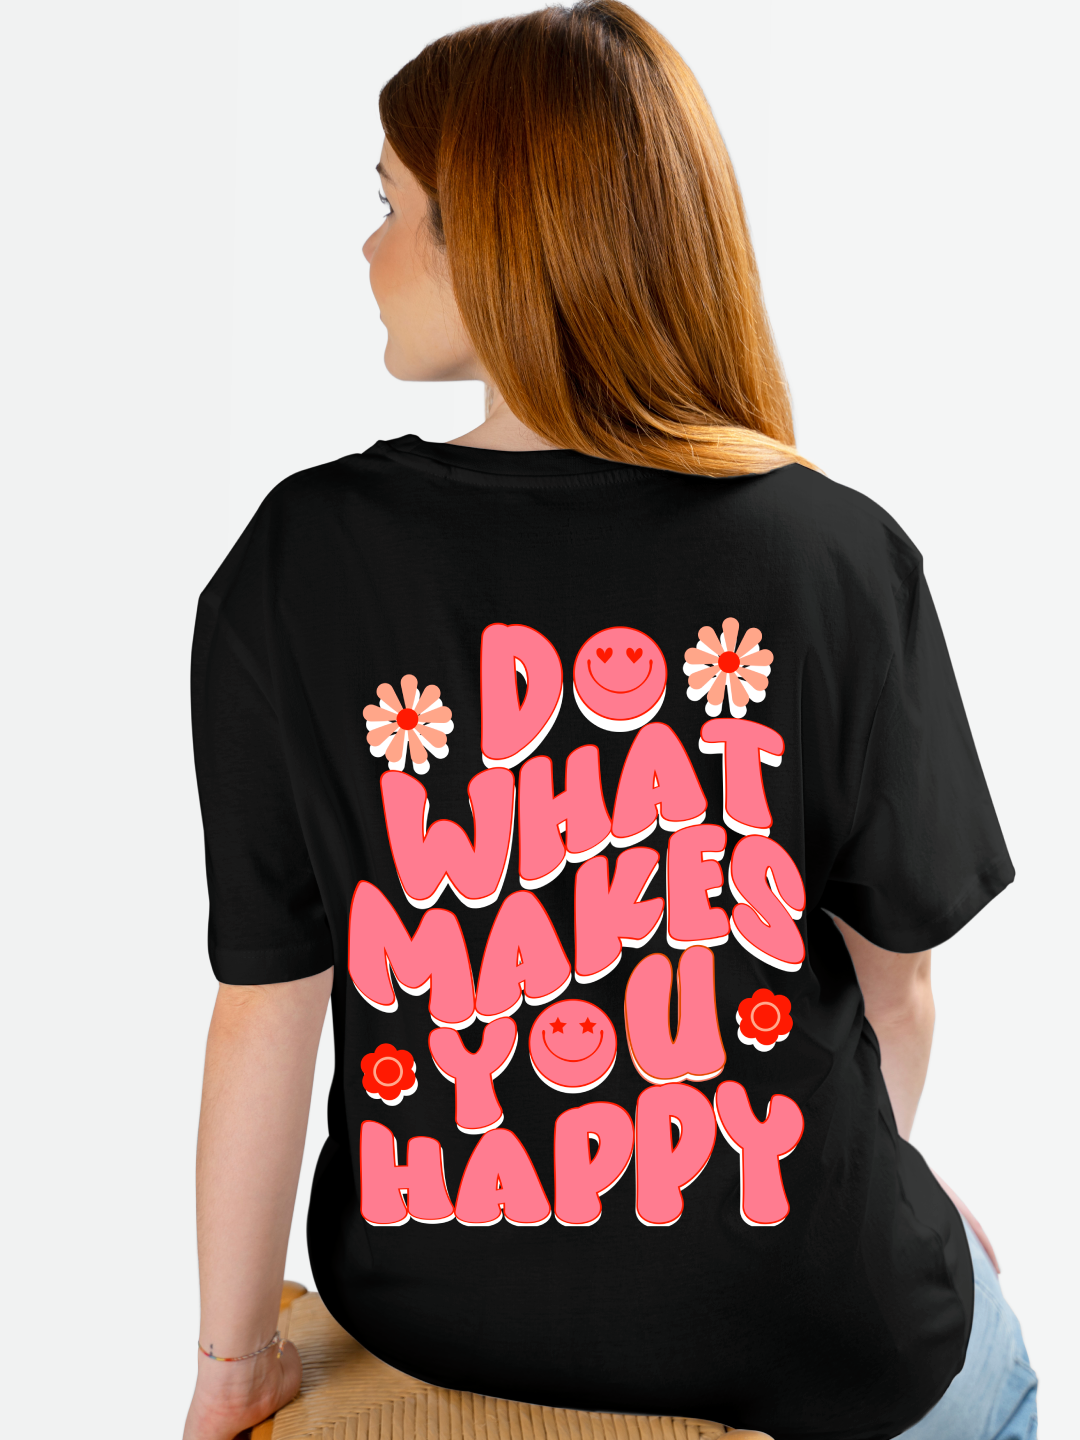 Women's Oversized T-shirt with 'Do what makes you happy' Design – Black Color Option